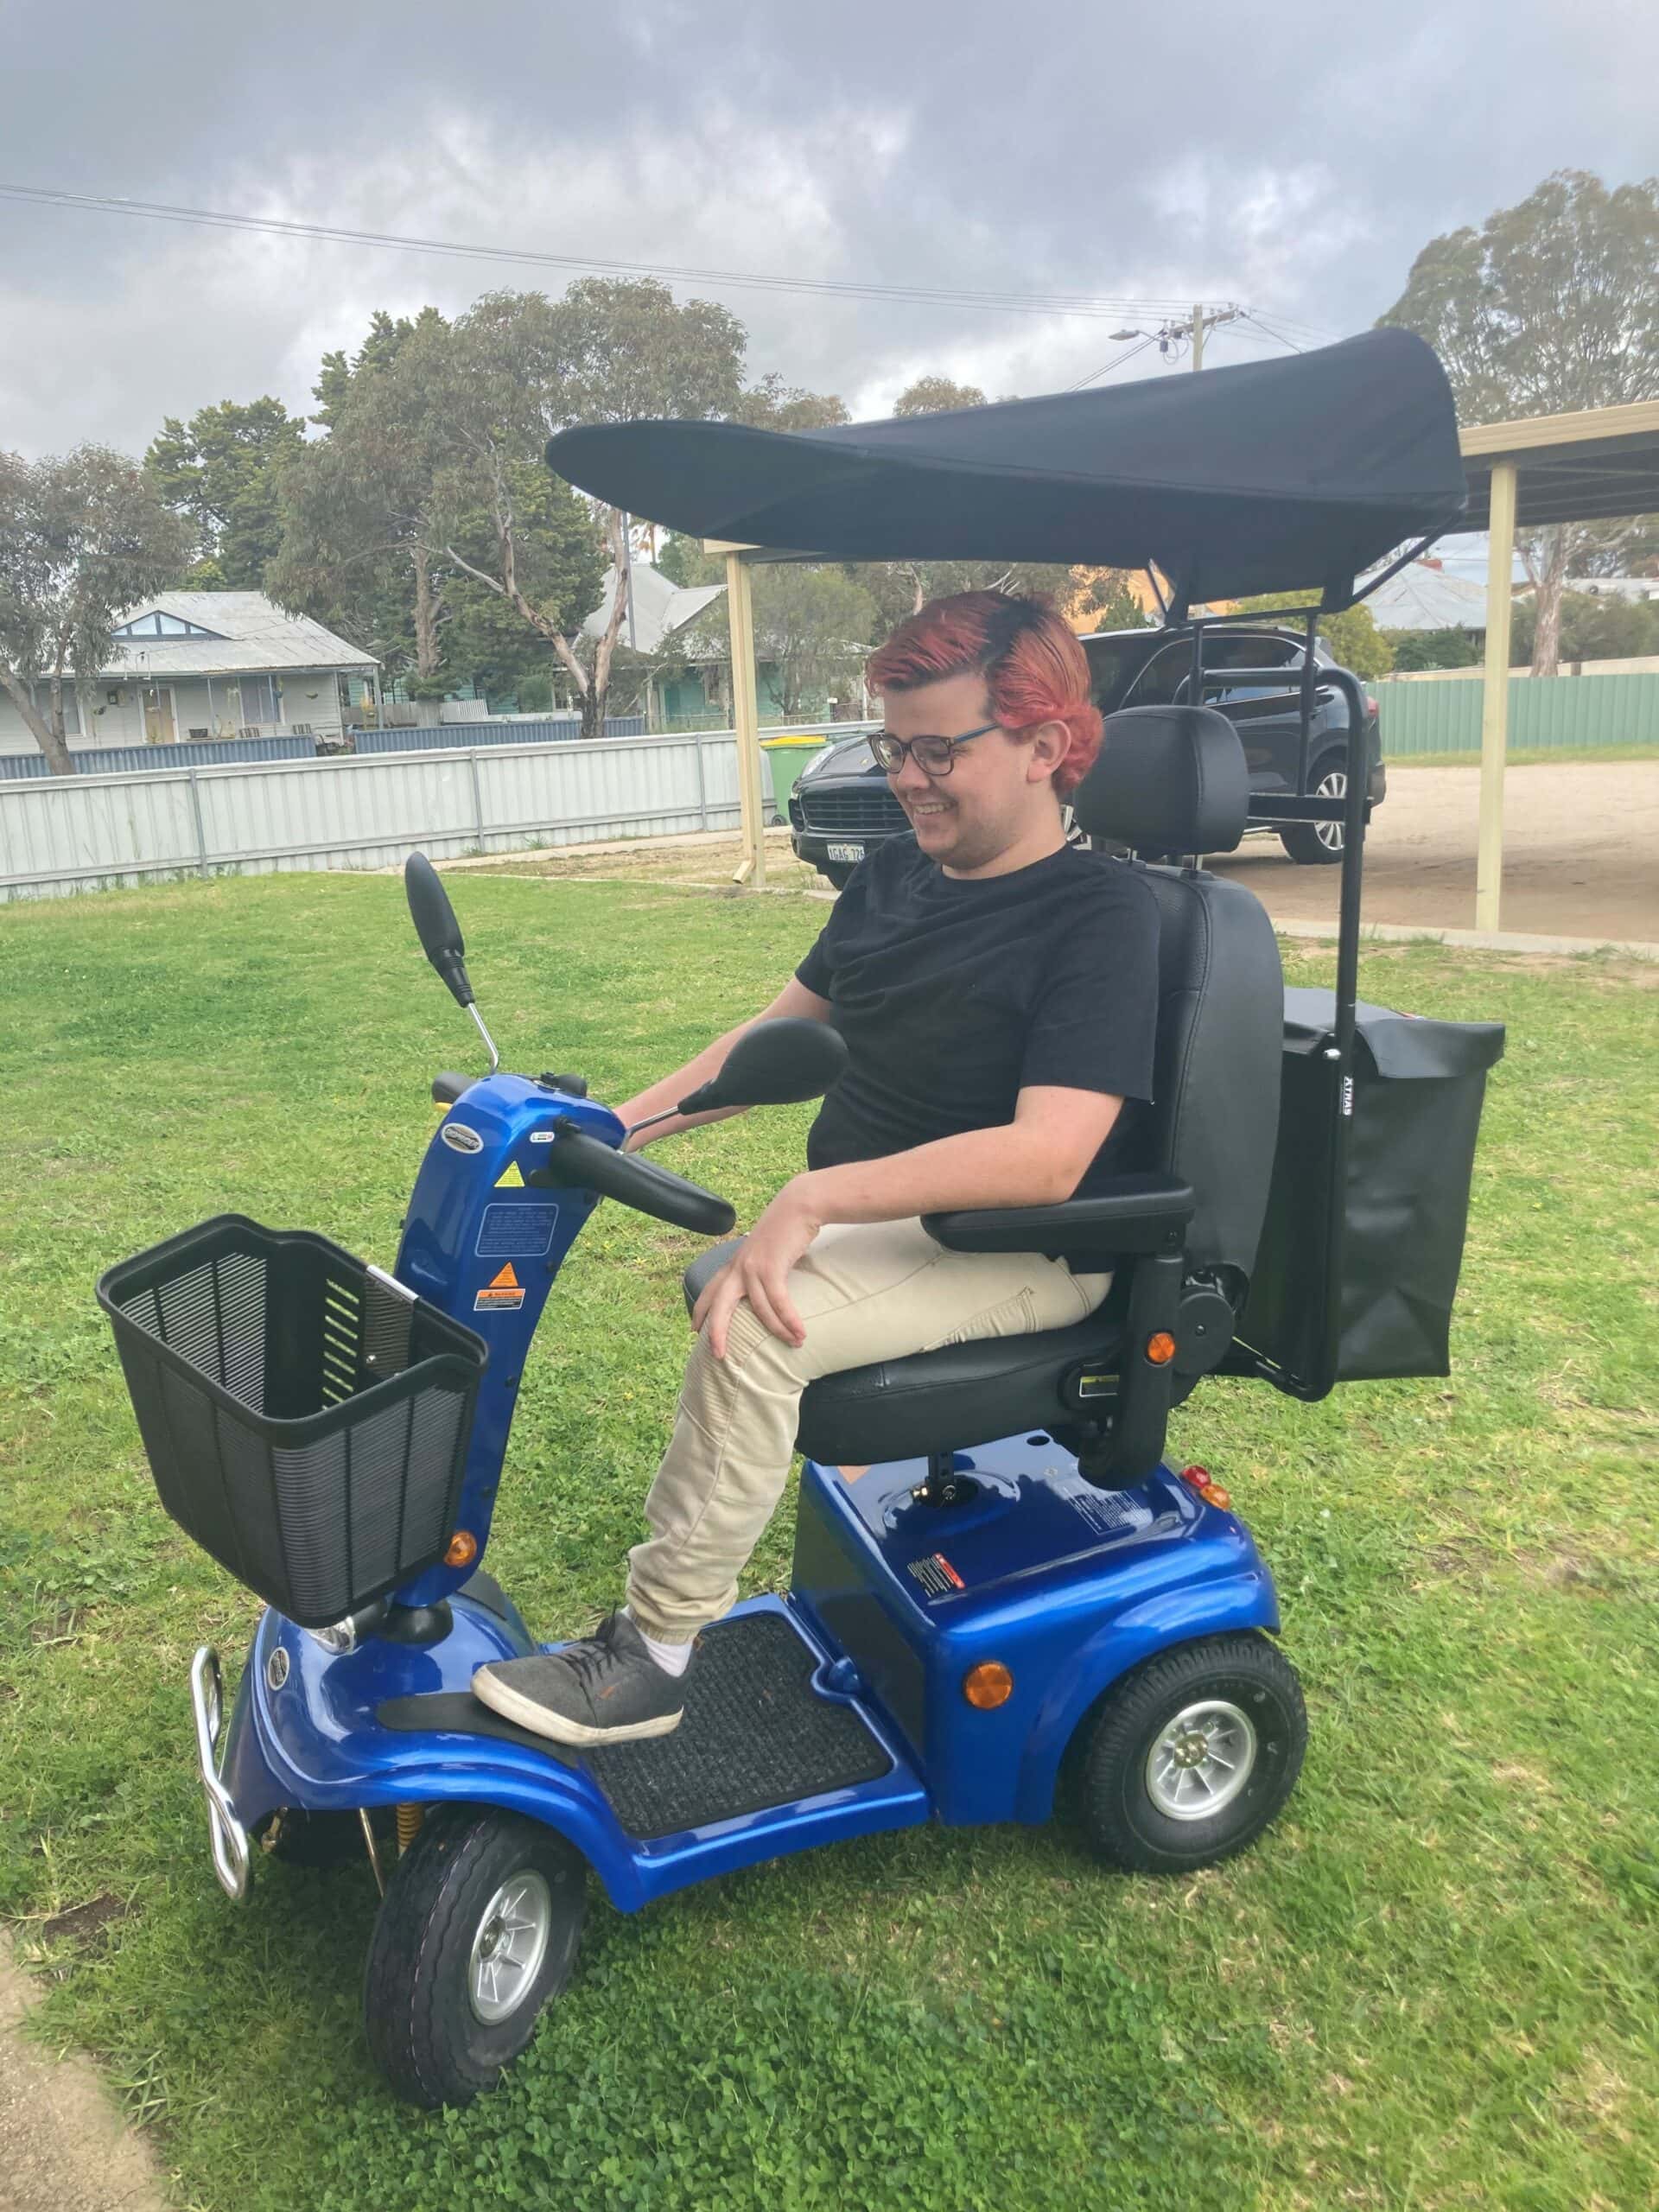 A young man sits on a blue scooter. He has red hair and wears a black t-shirt and cream pants. His scooter has a black basket on the front and a black shade over the top. He is parked on a lawn.